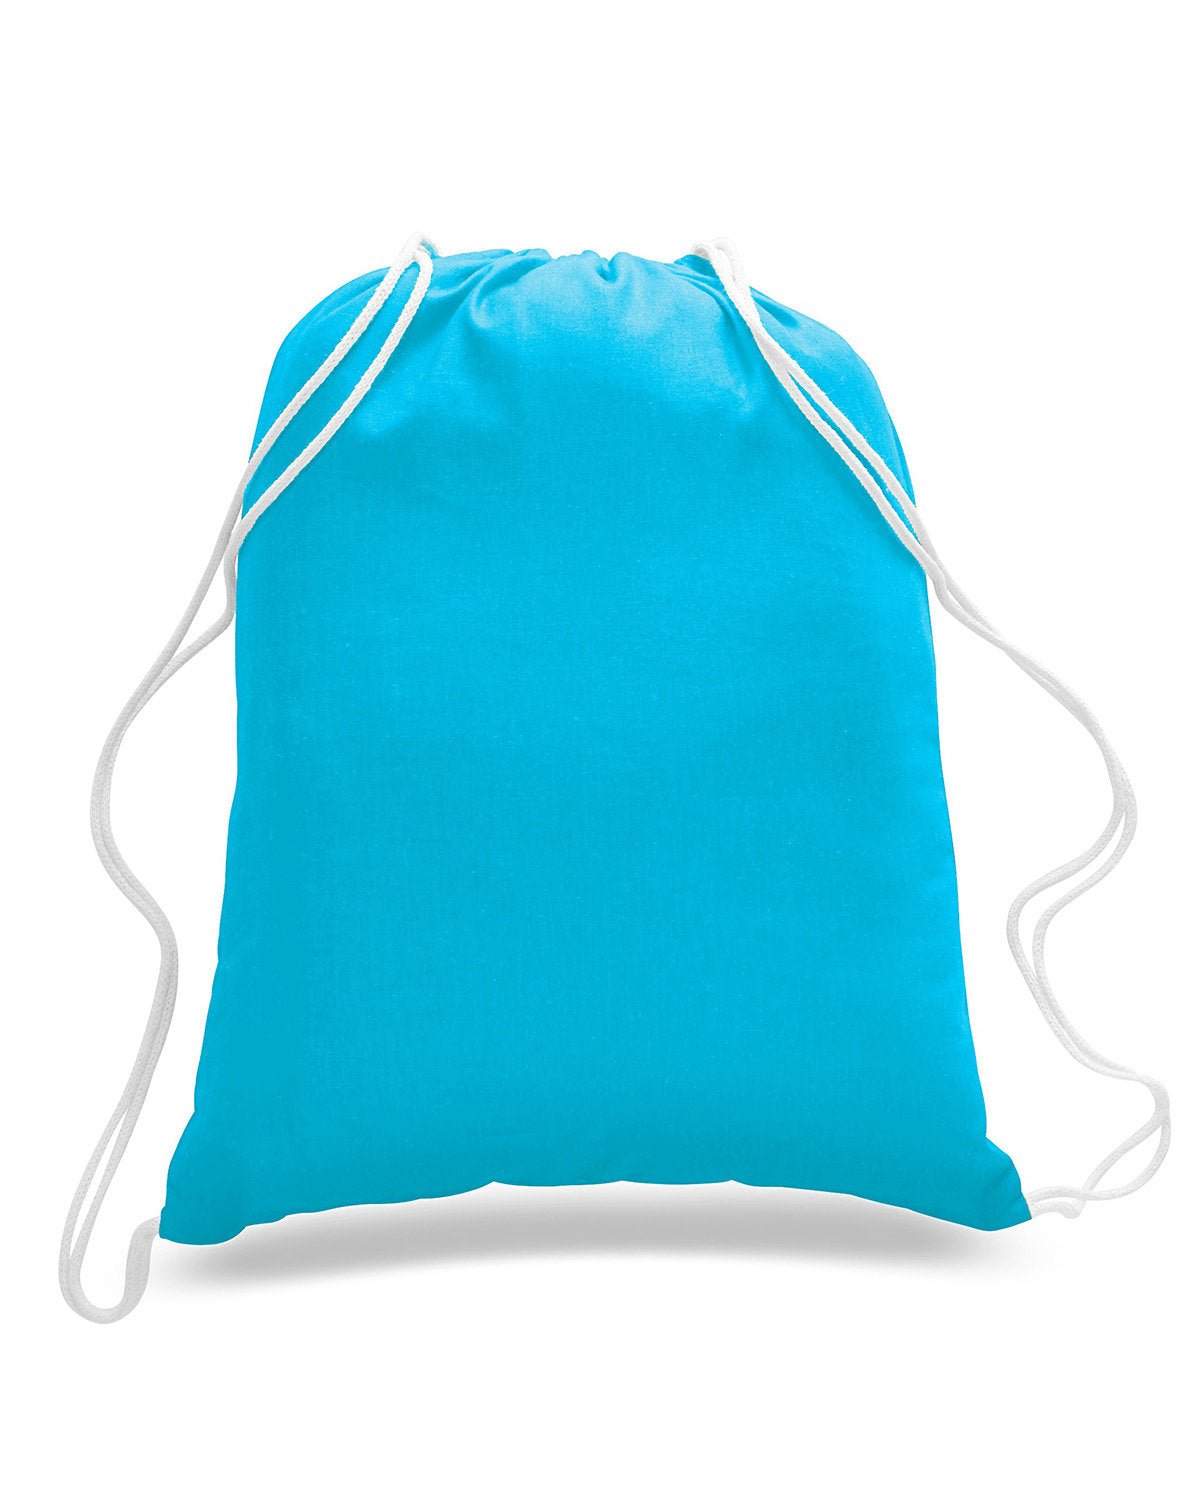 OAD101-OAD-TURQUOISE-OAD-Bags and Accessories-1